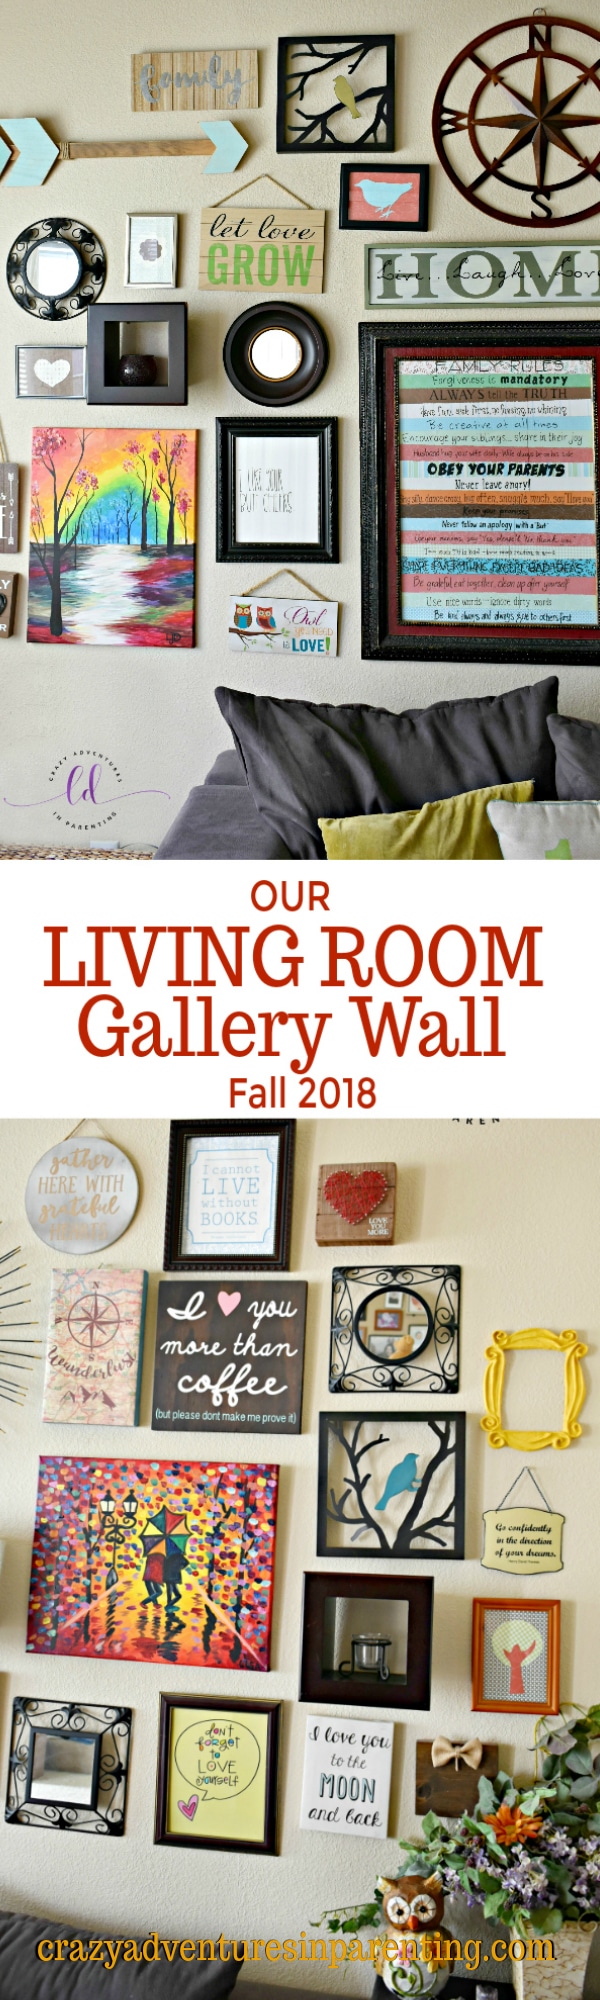 Our Living Room Gallery Wall Fall 2018